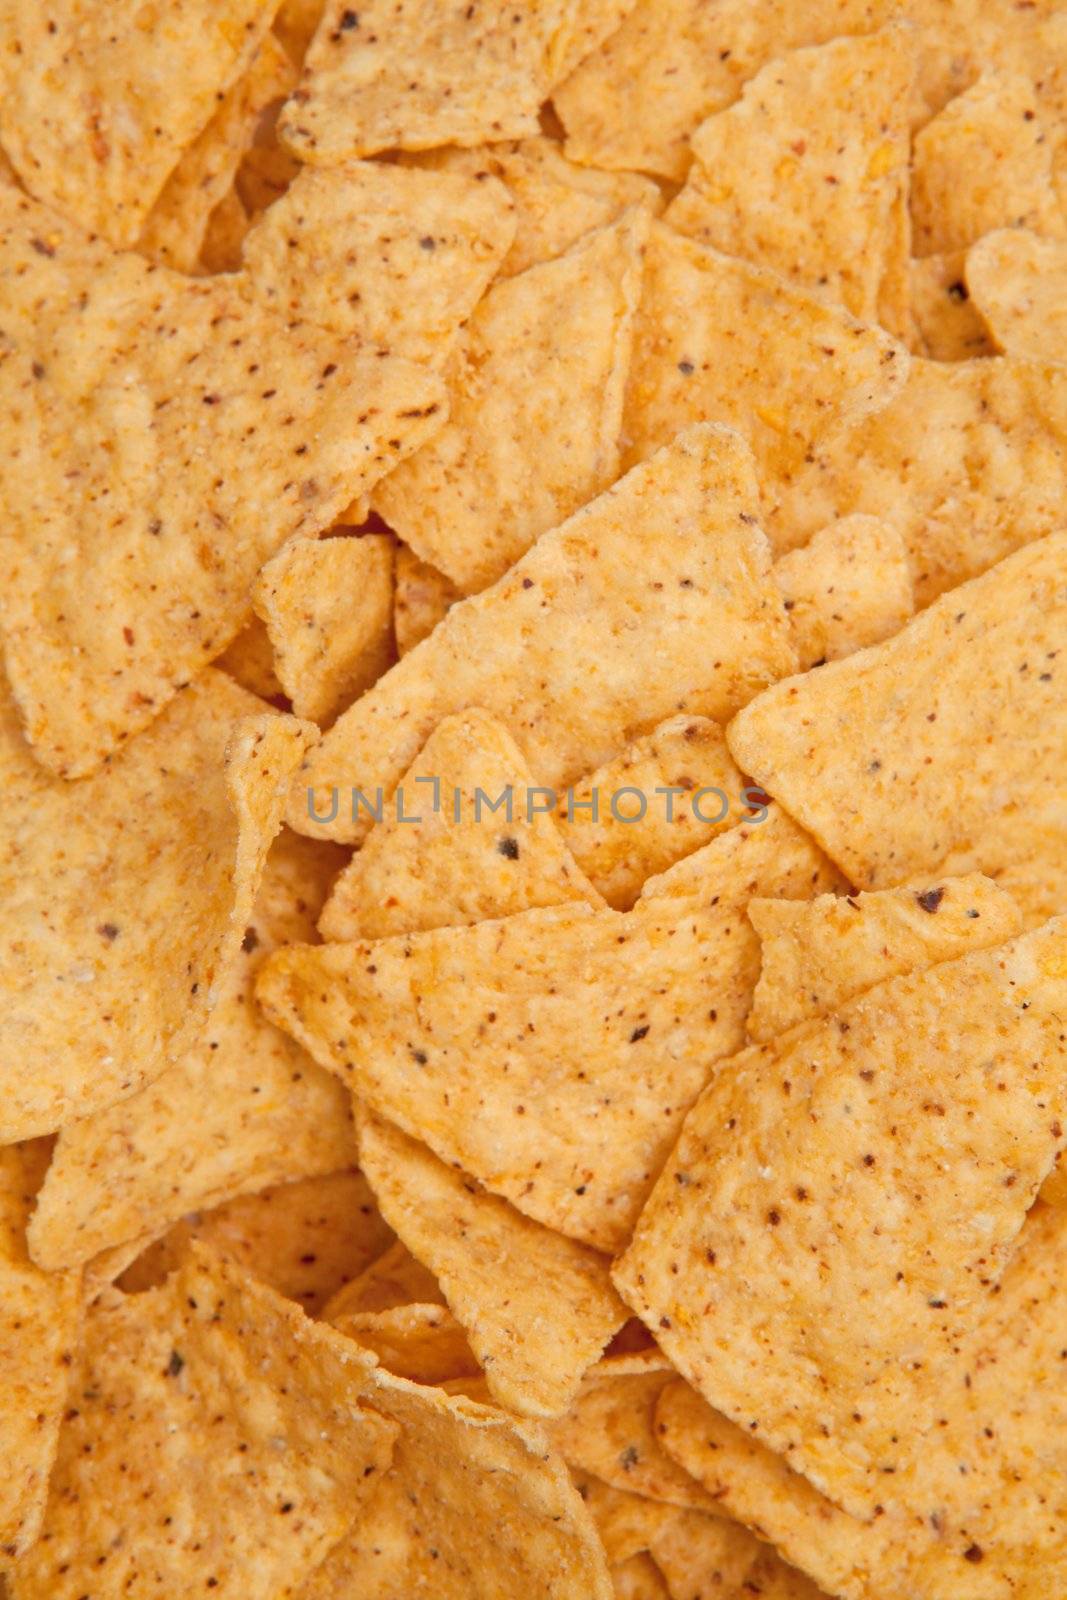 Chips placed together by Wavebreakmedia